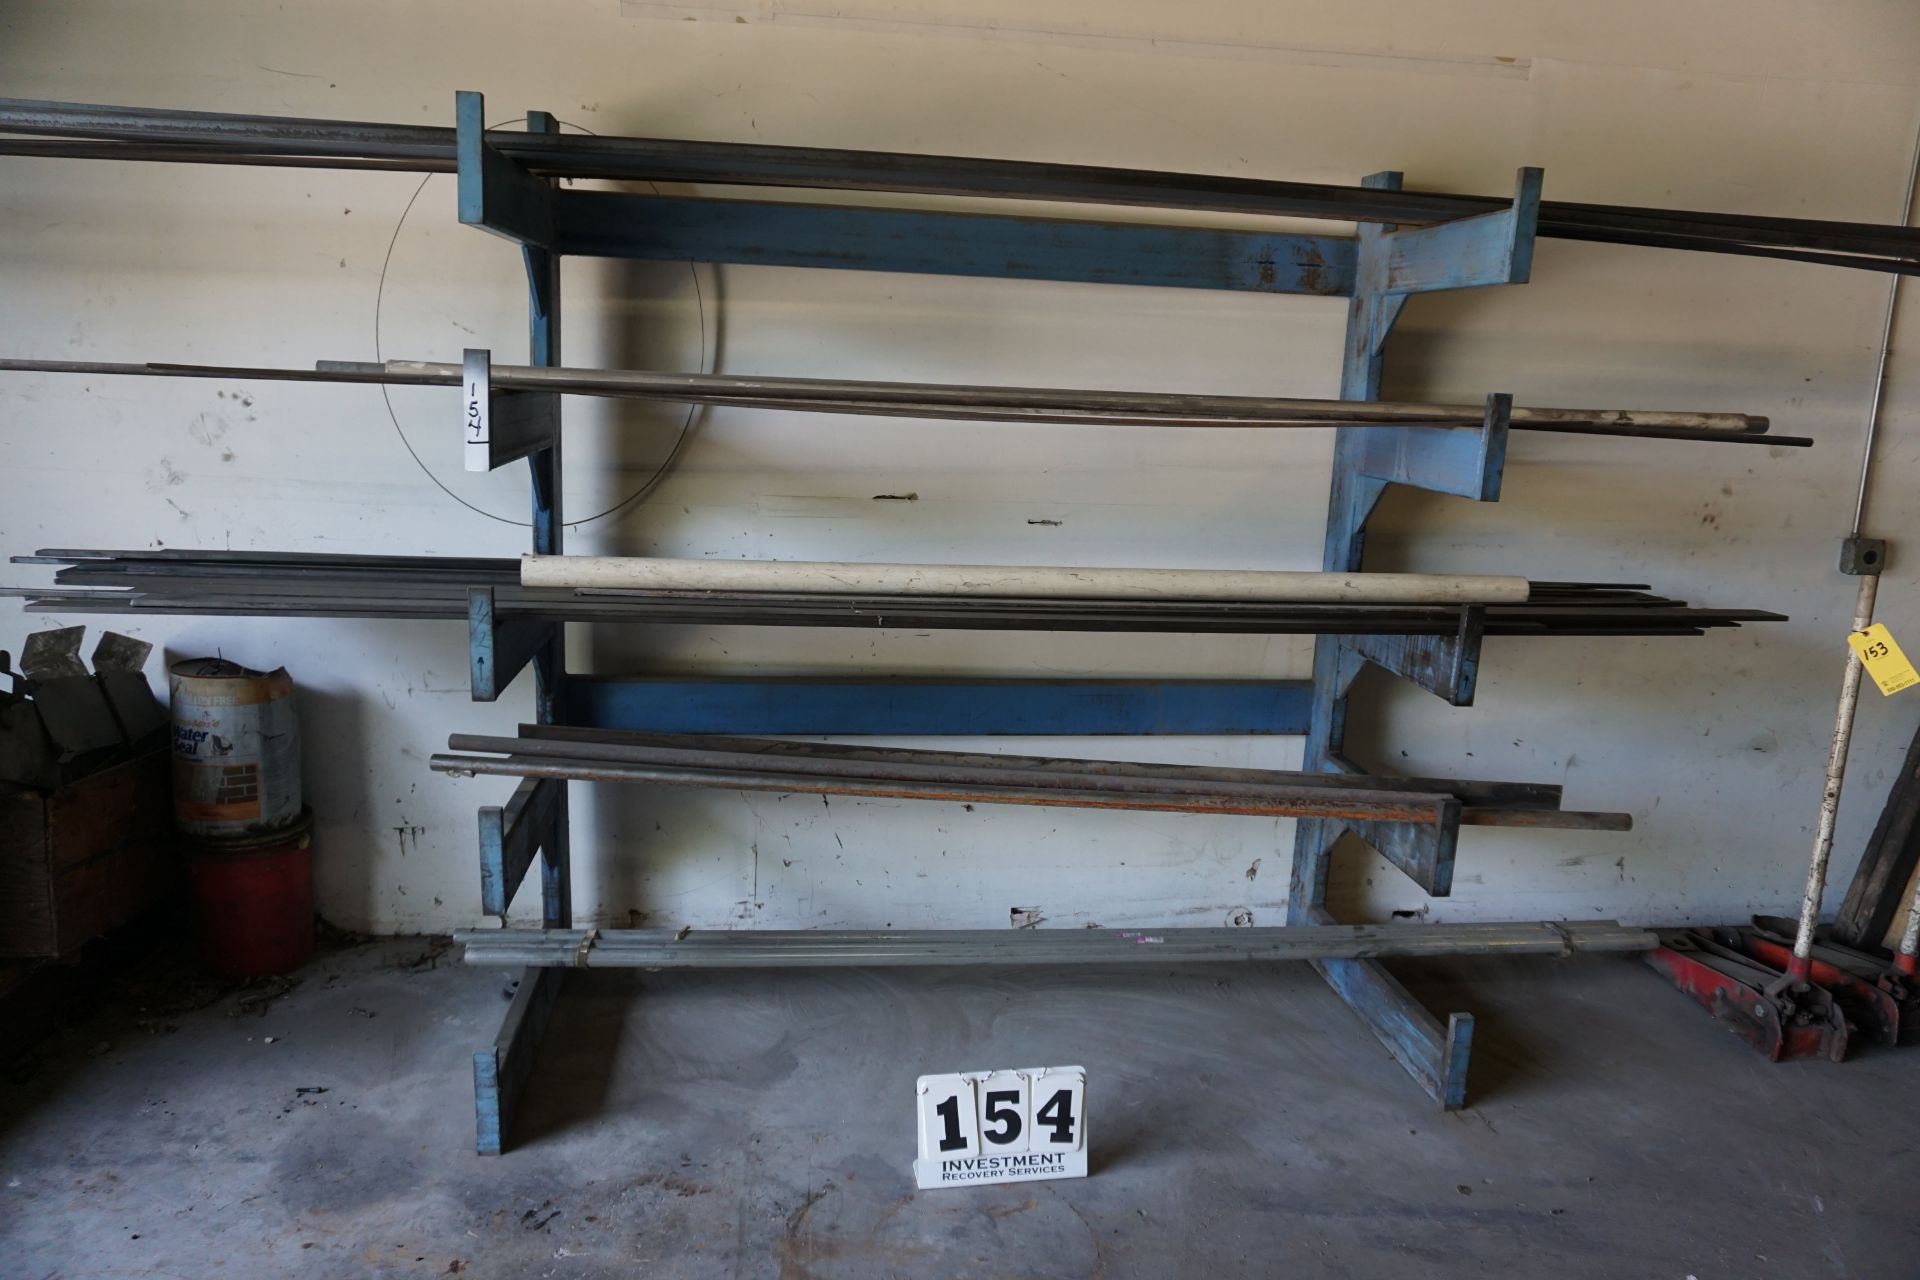 (3) MATERIAL RACK, (2) 6 1/2' TALL X 7' WIDE W/ 18" ARMS, (1) 52" TALL X 52" WIDE W/ 22" ARMS W/